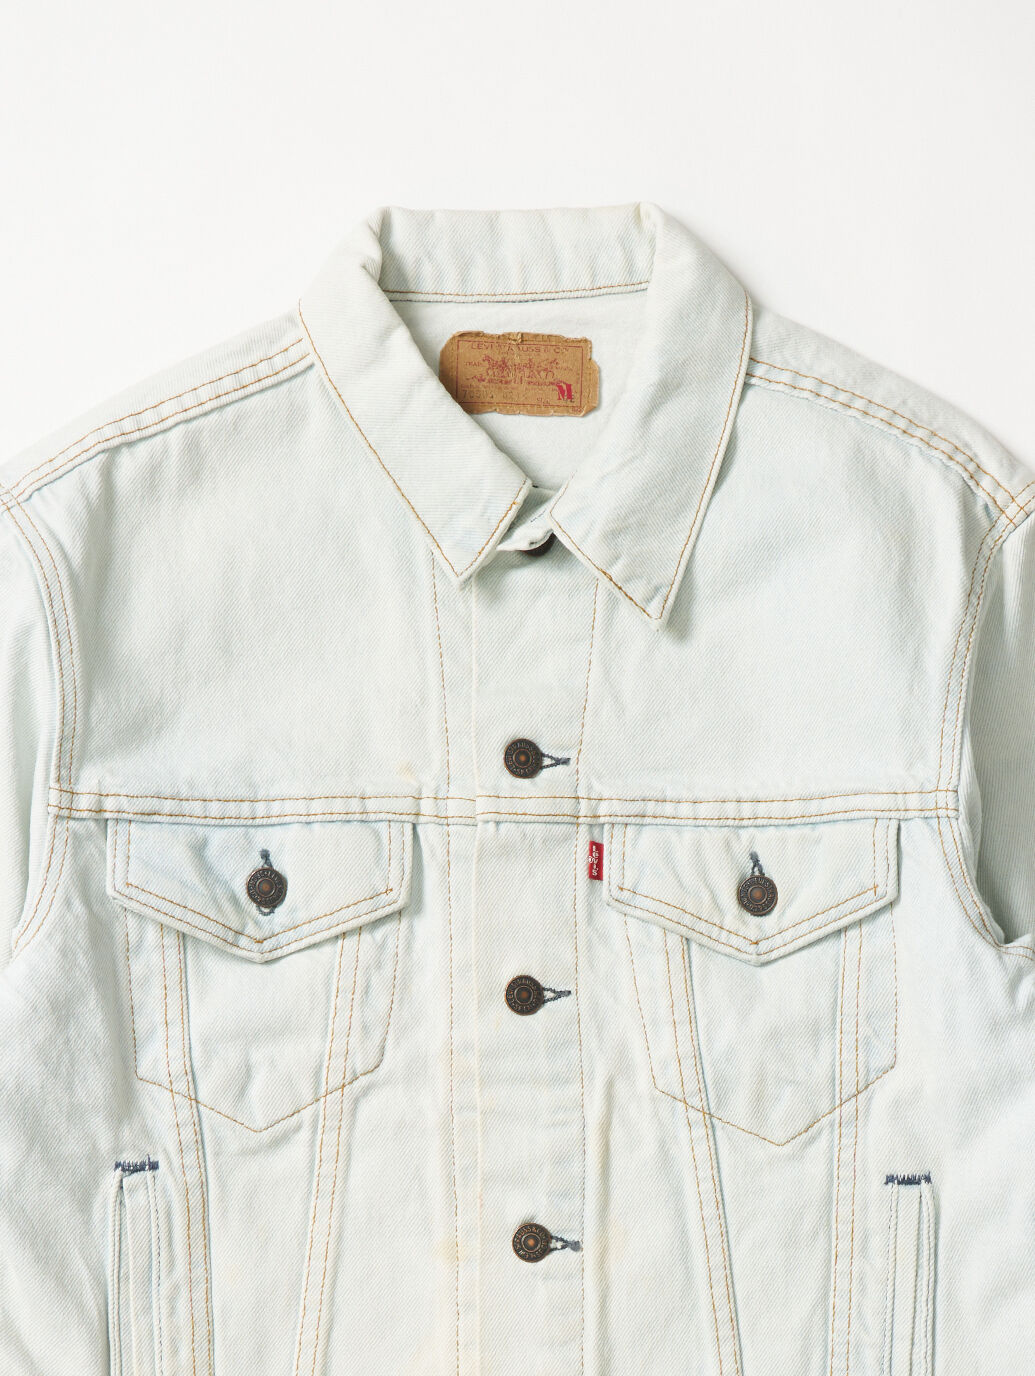 LEVI'S® AUTHORIZED VINTAGE MADE IN THE USA TYPEⅢ トラッカー 